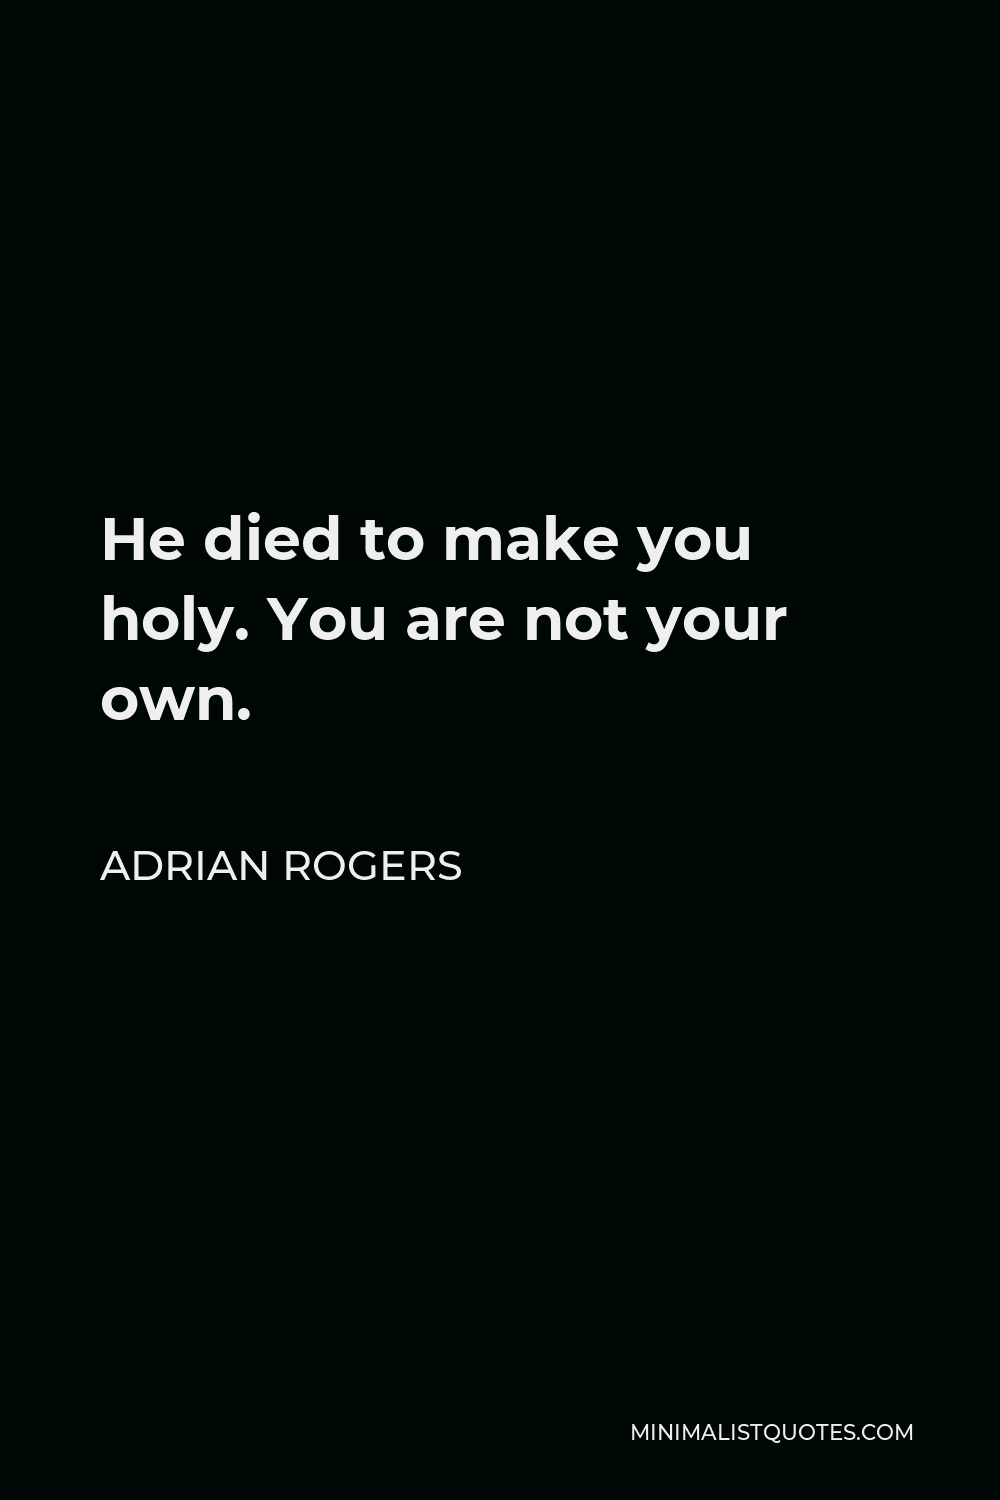 Adrian Rogers Quote - He died to make you holy. You are not your own.